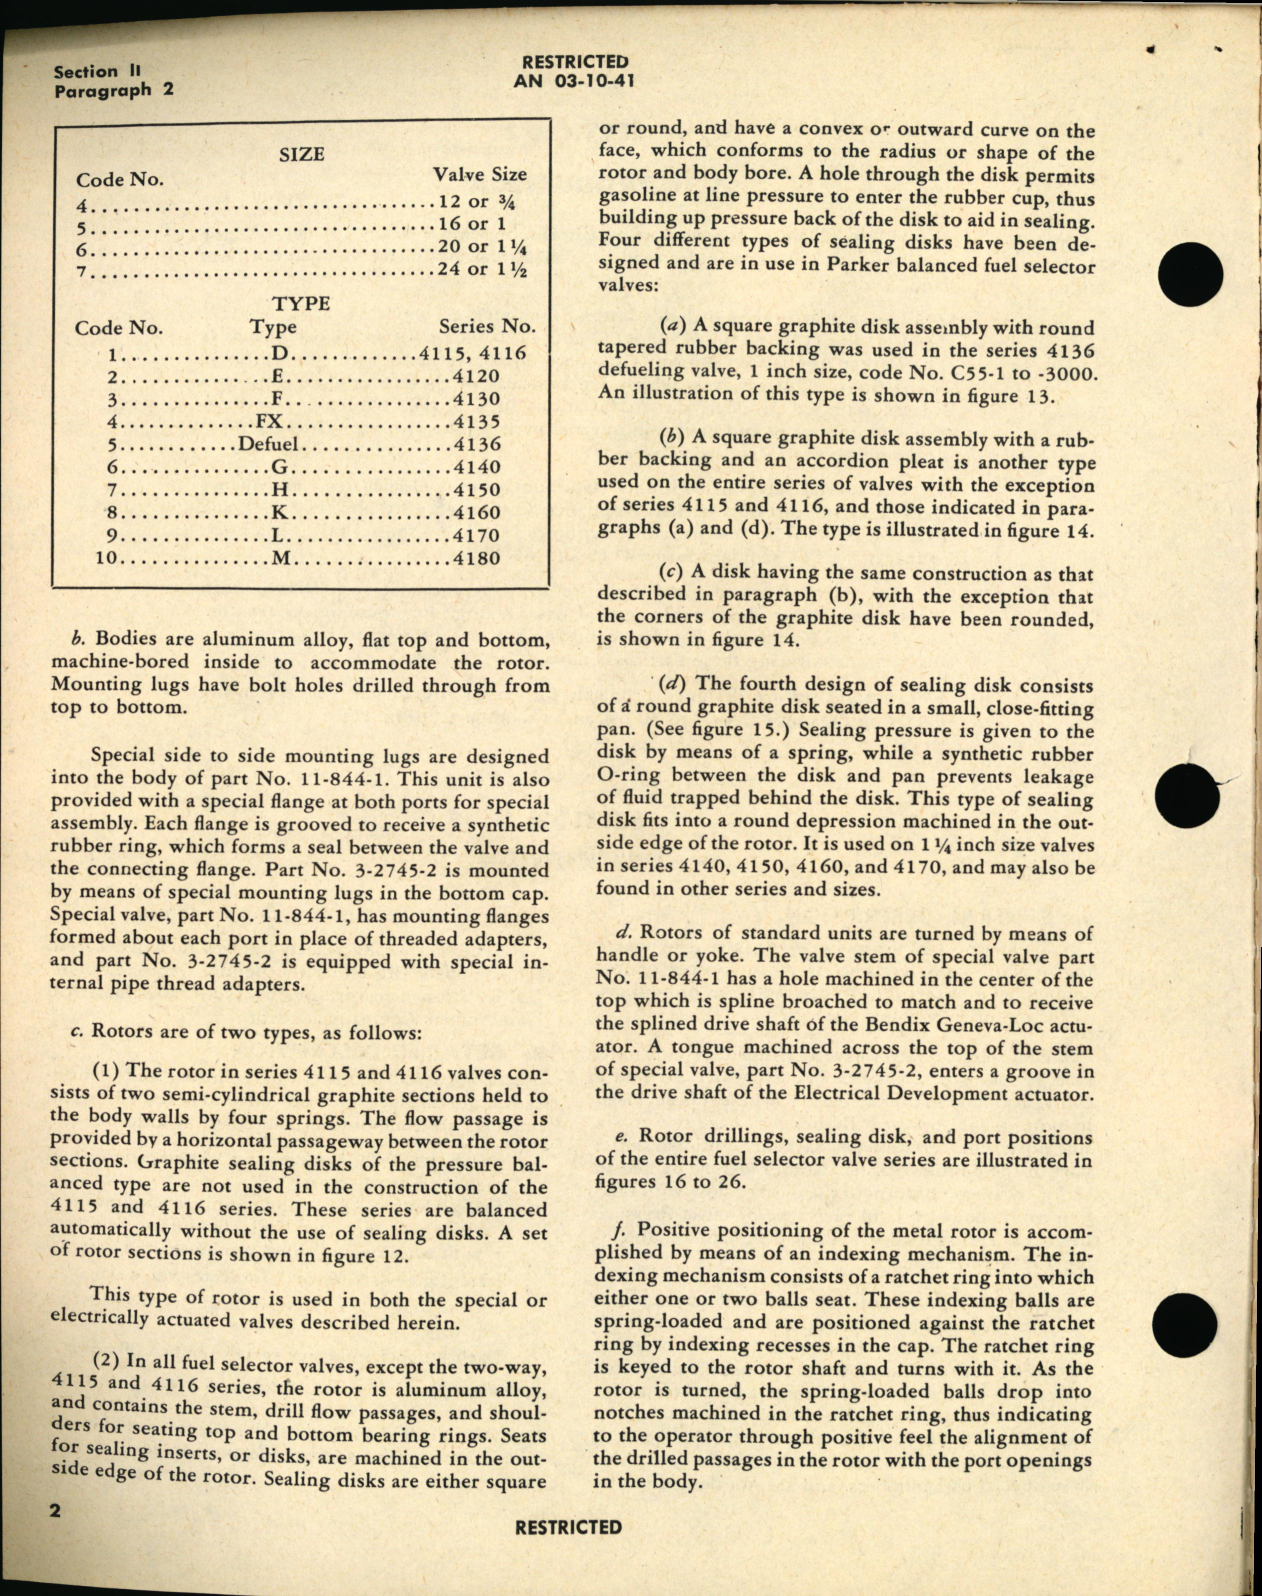 Sample page 8 from AirCorps Library document: Operation, Service, & Overhaul Instructions with Parts Catalog for Balanced Fuel Selector Valves